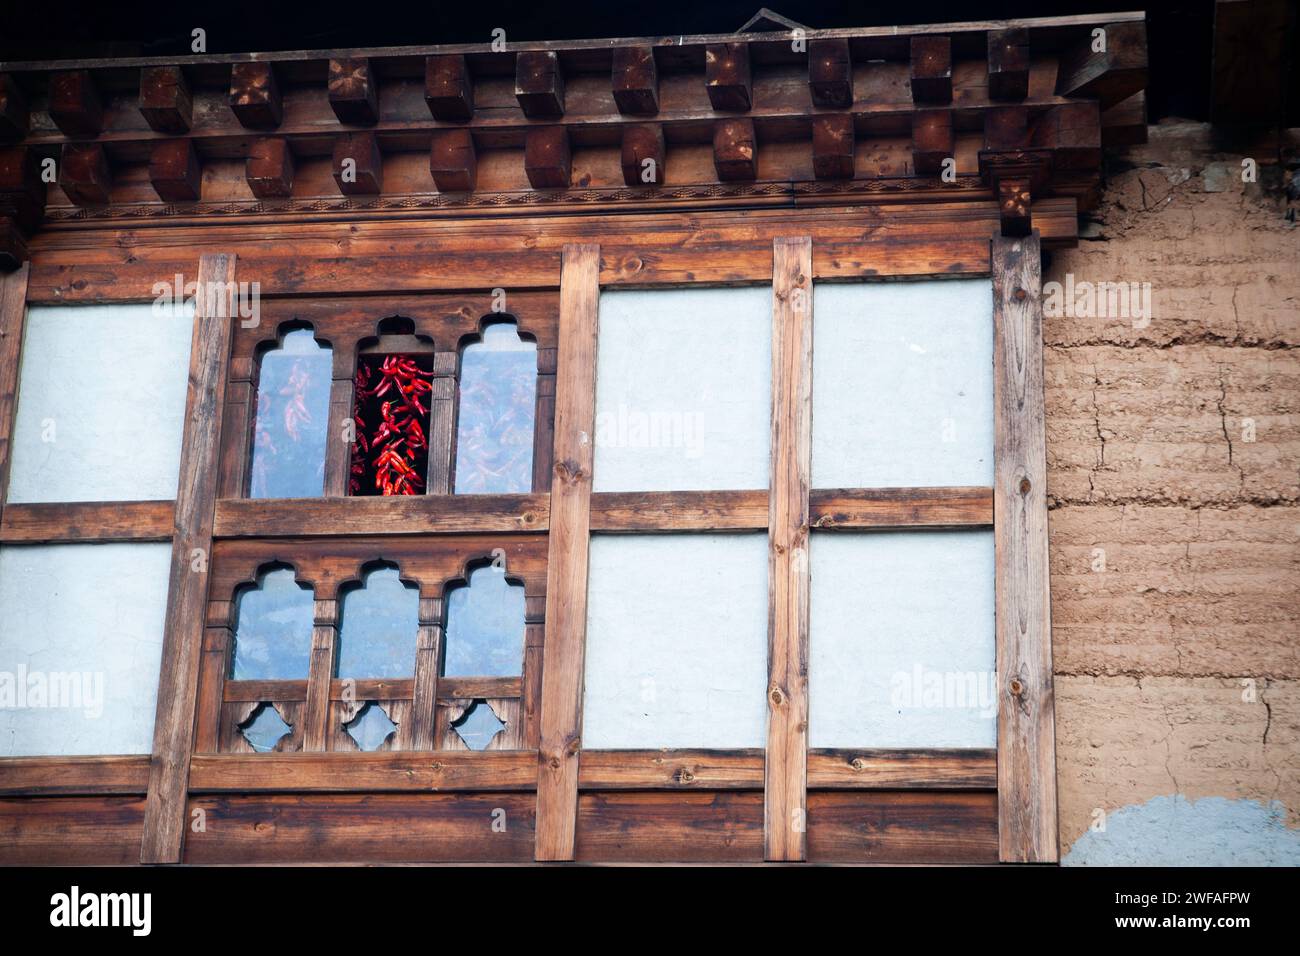 Red chili peppers drying indoors hung from rafters as seen through a window of a building, Bhutan, Asia Stock Photo